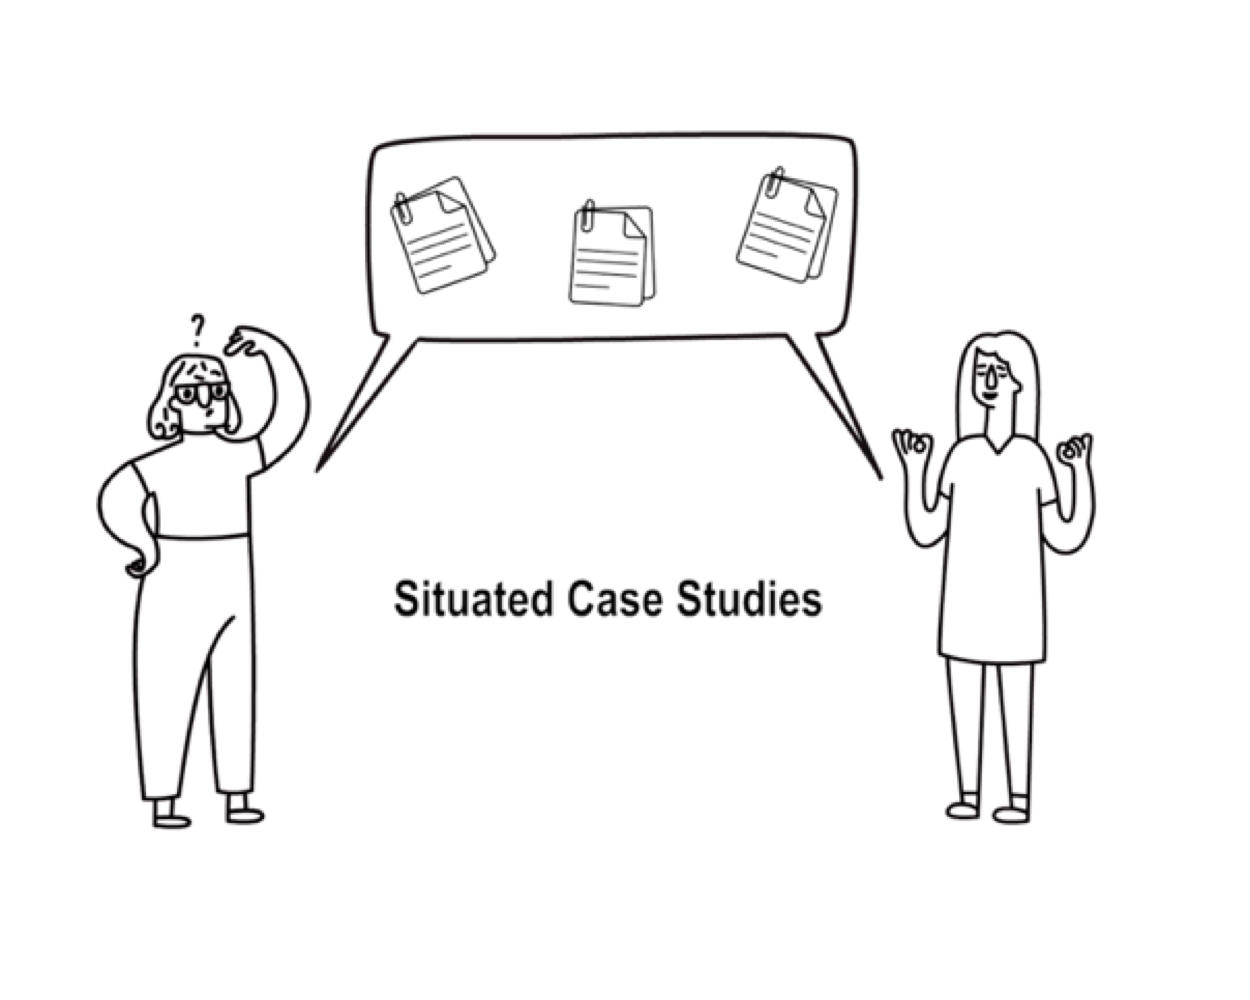 Situated Case Studies